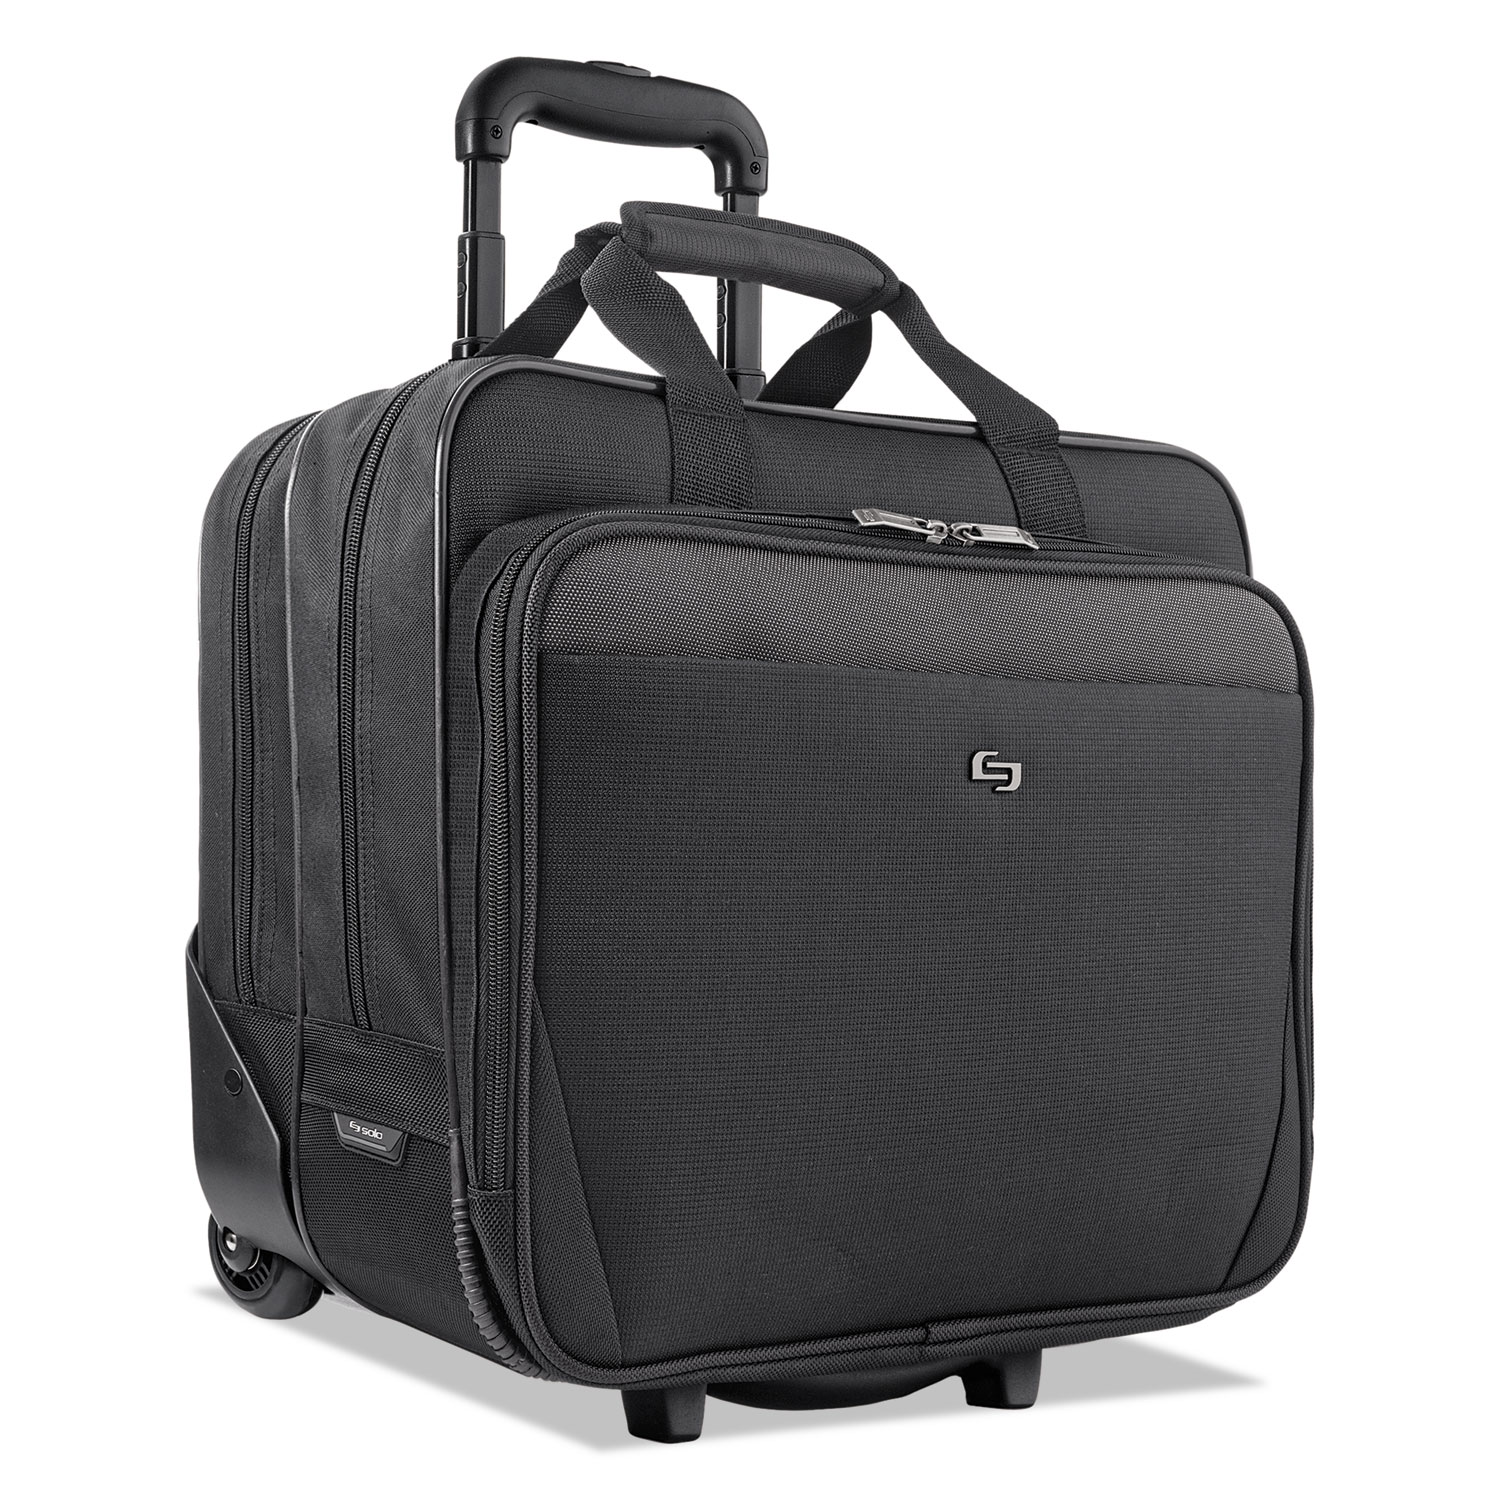 SOLO Classic Rolling Case, 17.3", 16 3/4" x 7" x 14 19/50", Black (CLS9104) - image 4 of 9